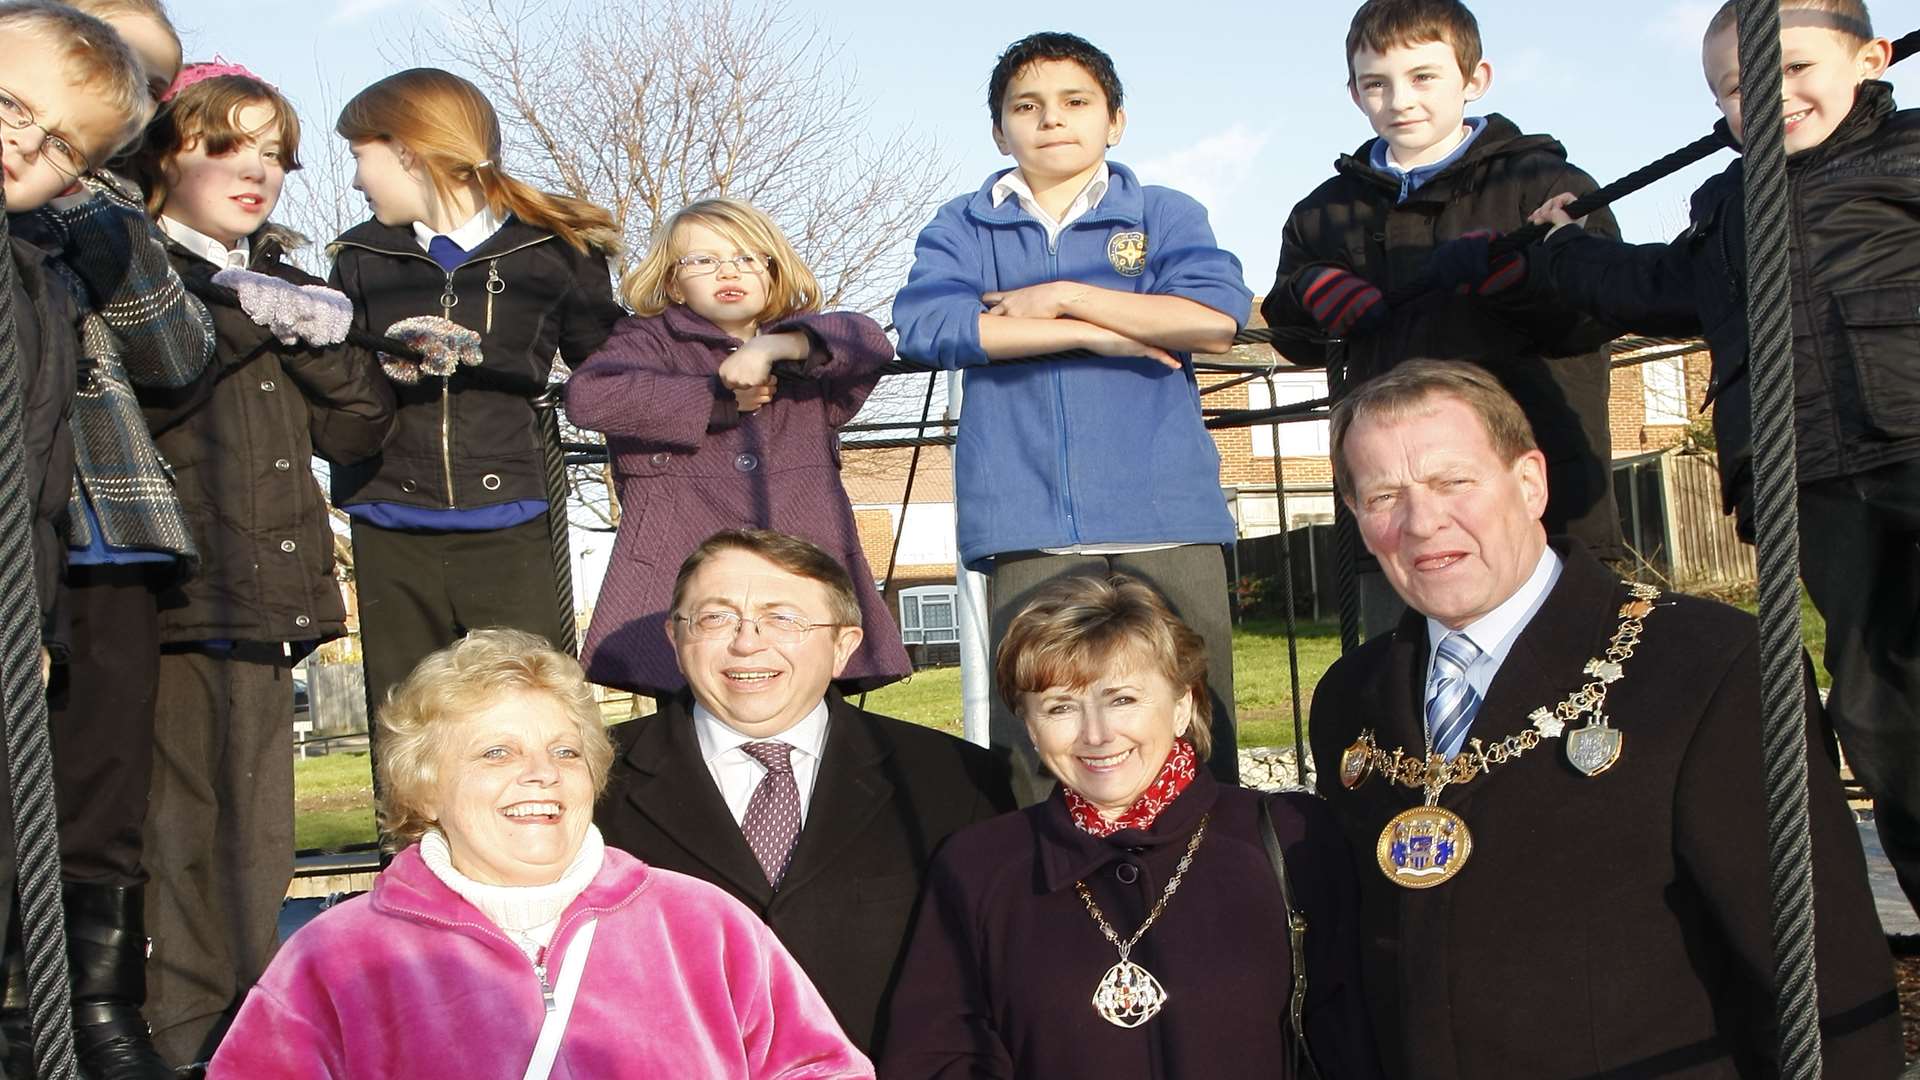 Pat Cooper with then MP Paul Clark MP Kirstine and David Carr with pupils from Burnt Oak School at Hillyfields Play Park